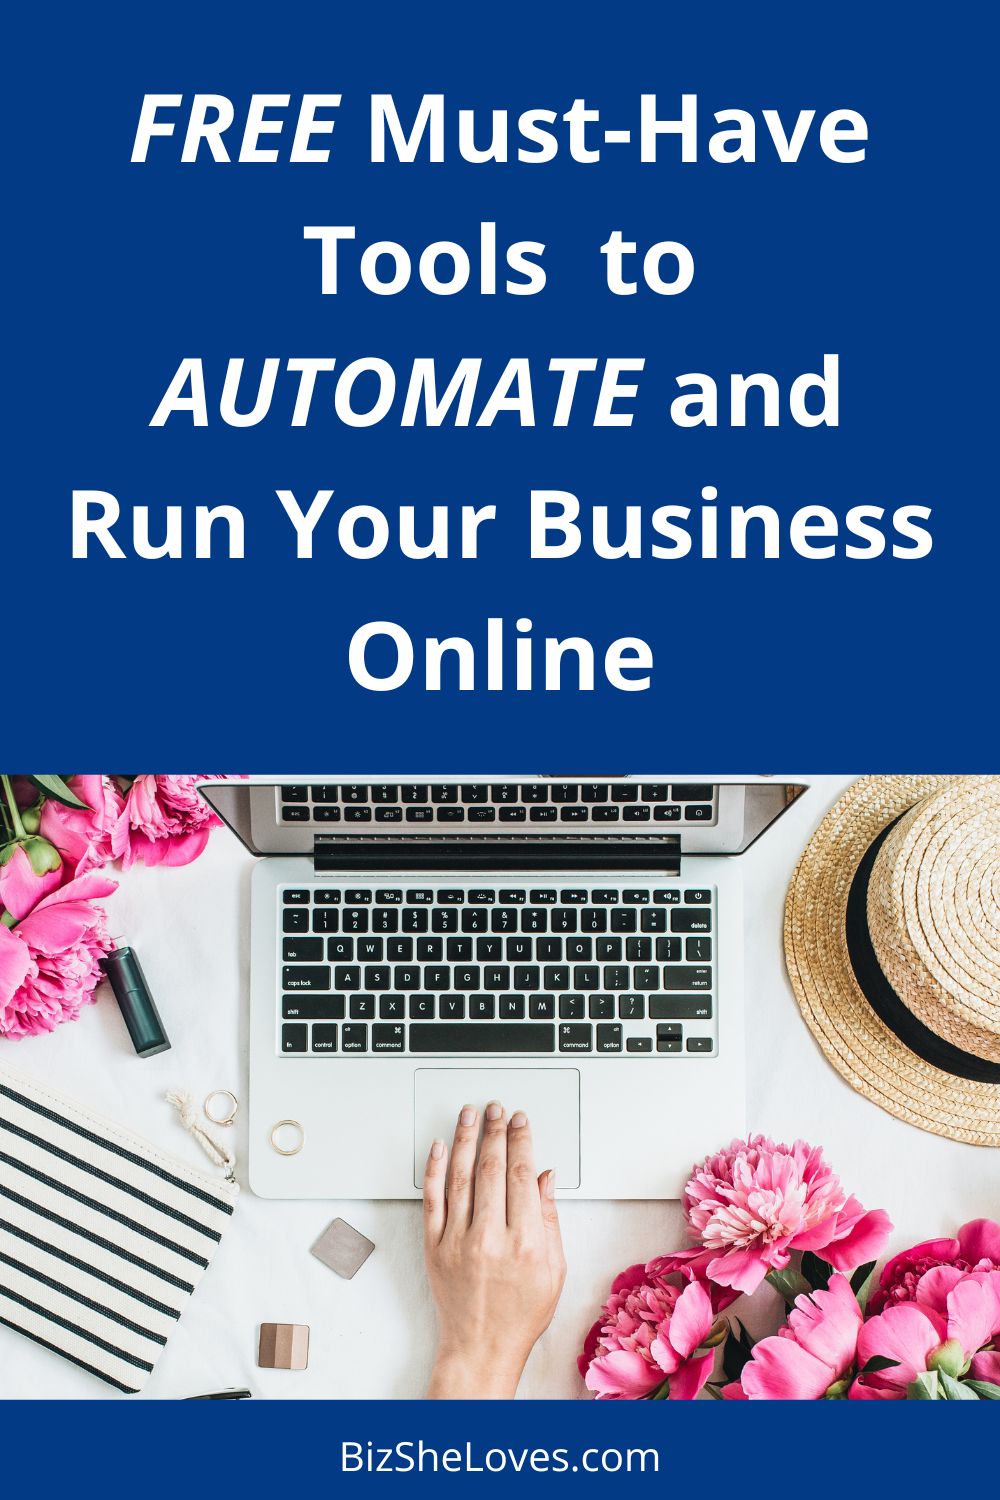 FREE Must-Have Tools to AUTOMATE and Run Your Business Online